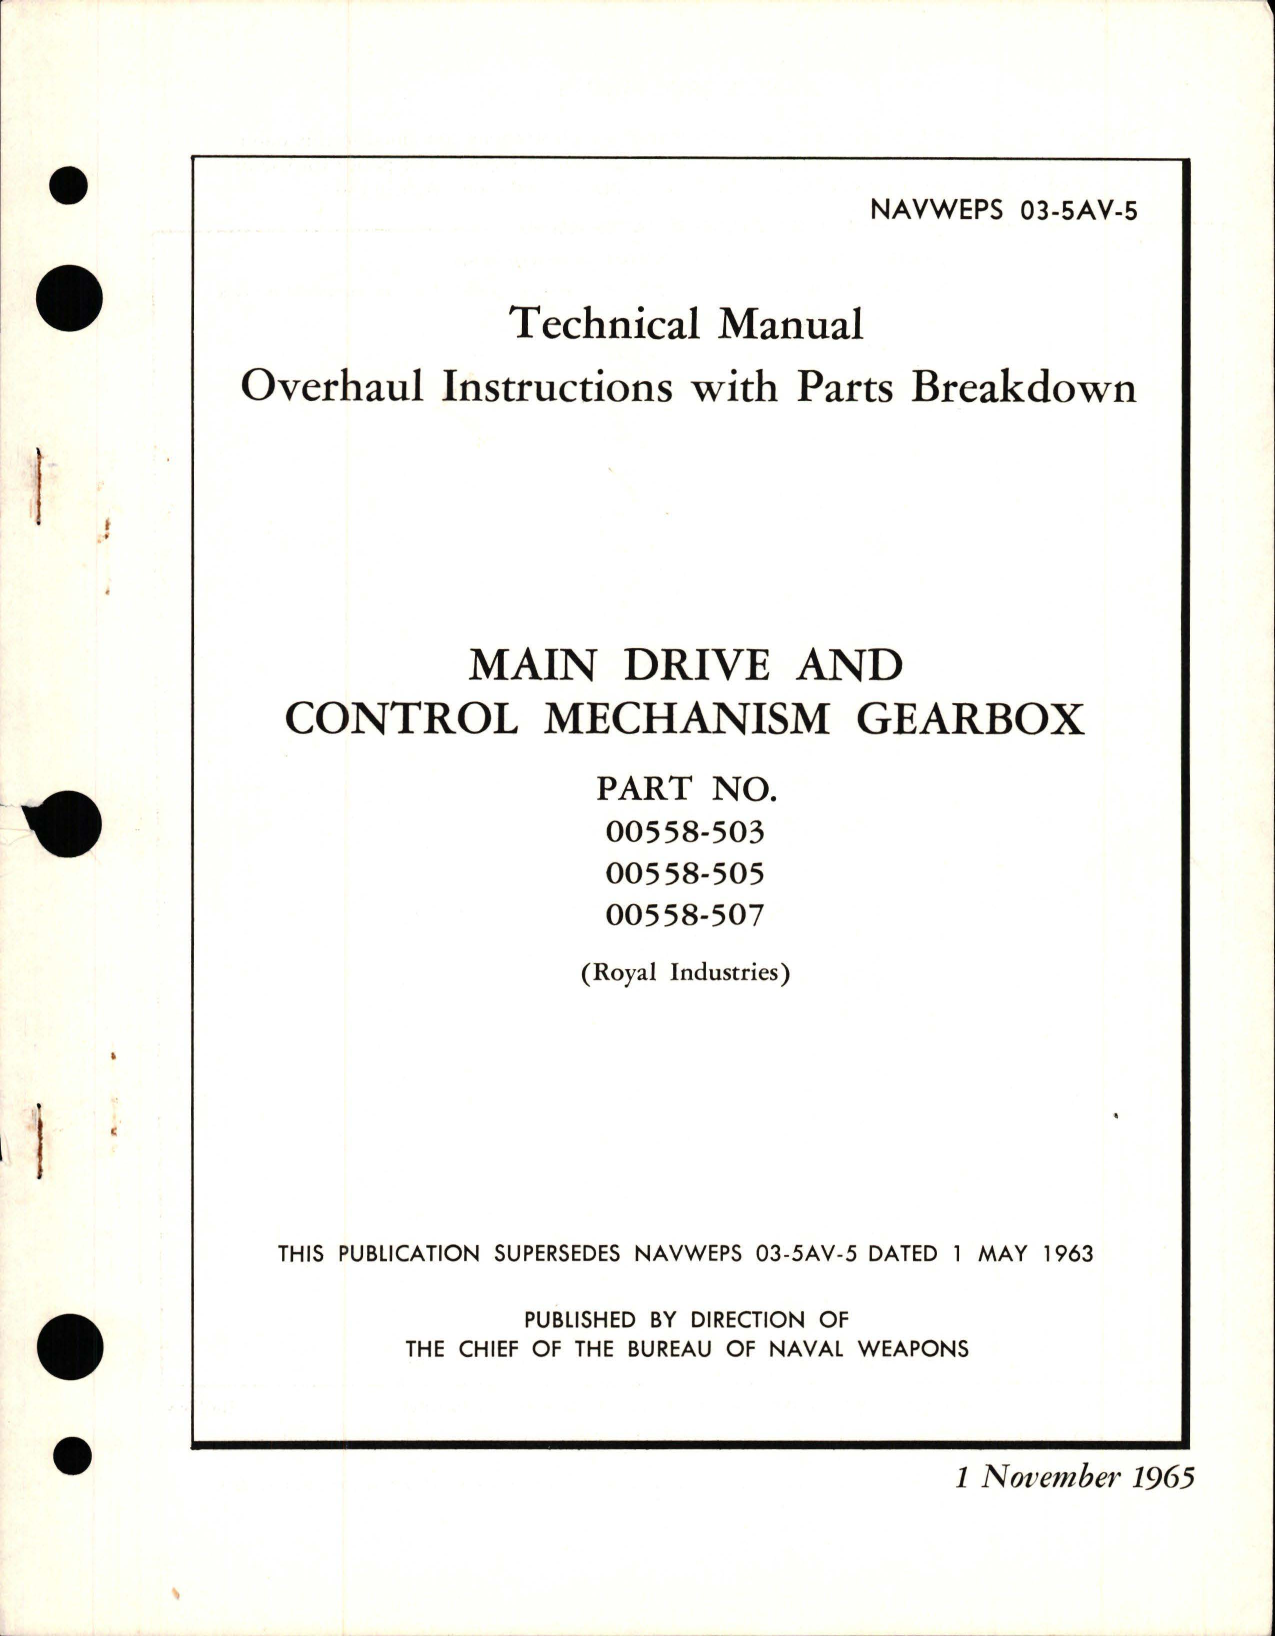 Sample page 1 from AirCorps Library document: Overhaul Instructions with Parts Breakdown for Main Drive and Control Mechanism Gearbox - Parts 00558-503, 00558-505, and 00558-507